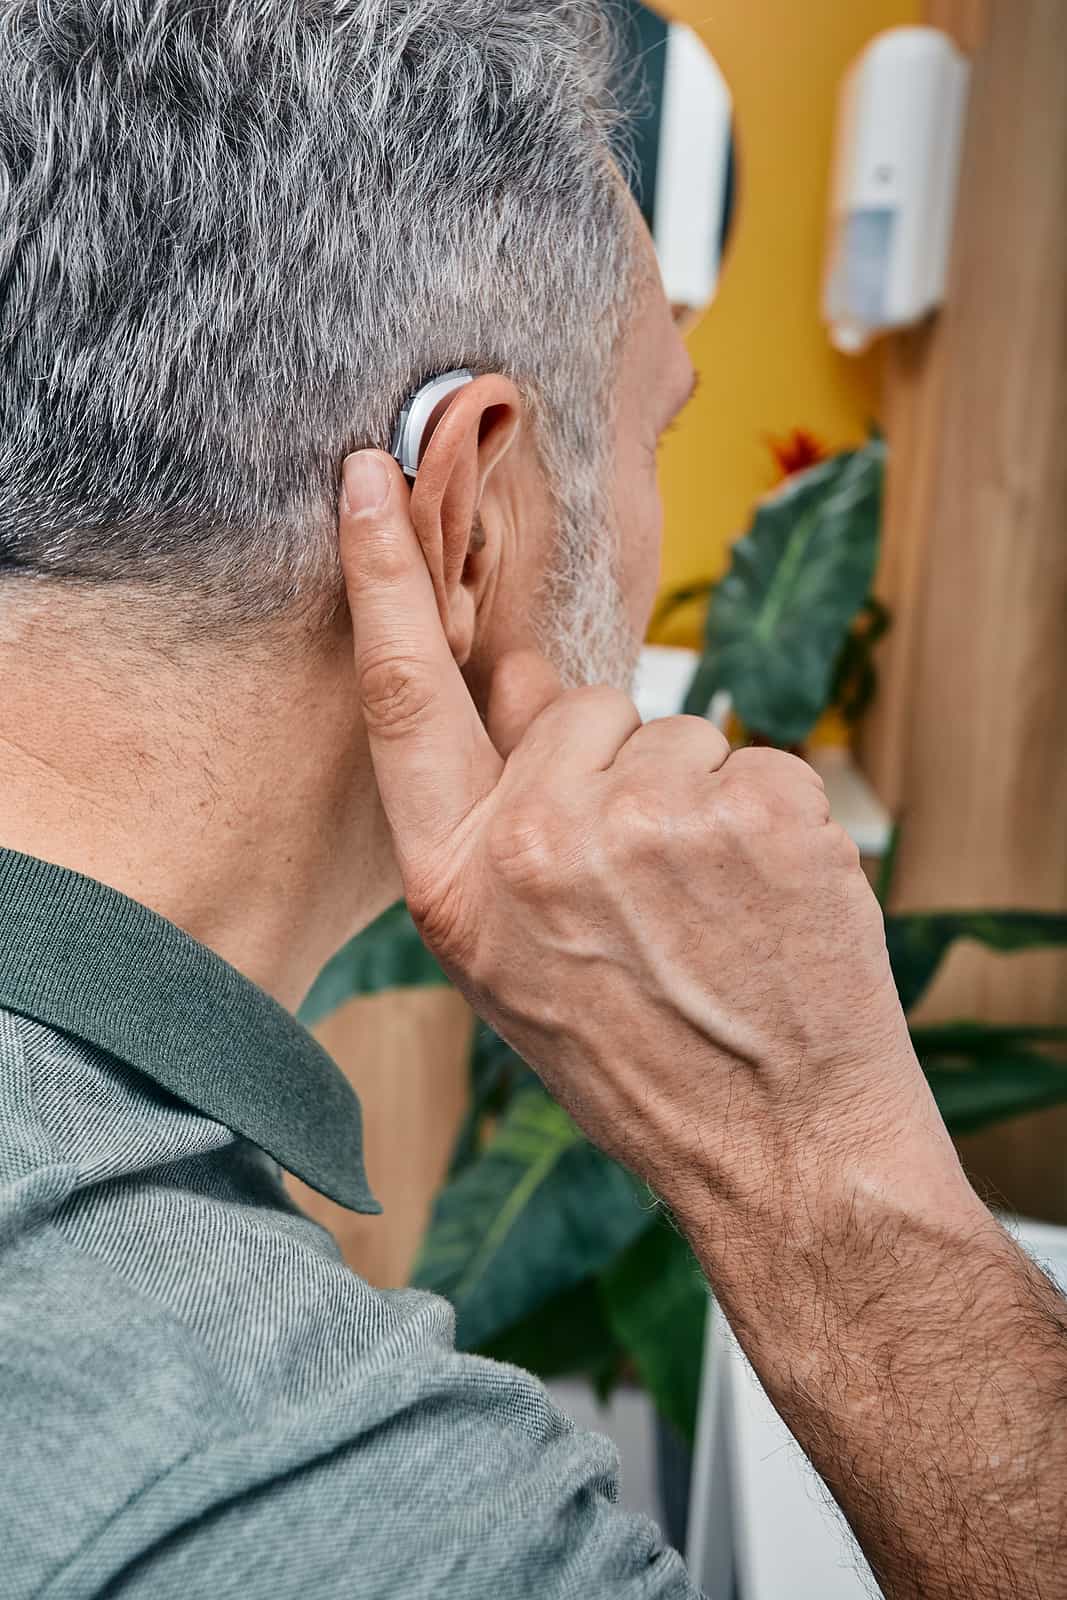 Featured image for “Seeking Hearing Loss Treatment Could Help Prevent or Delay Dementia”